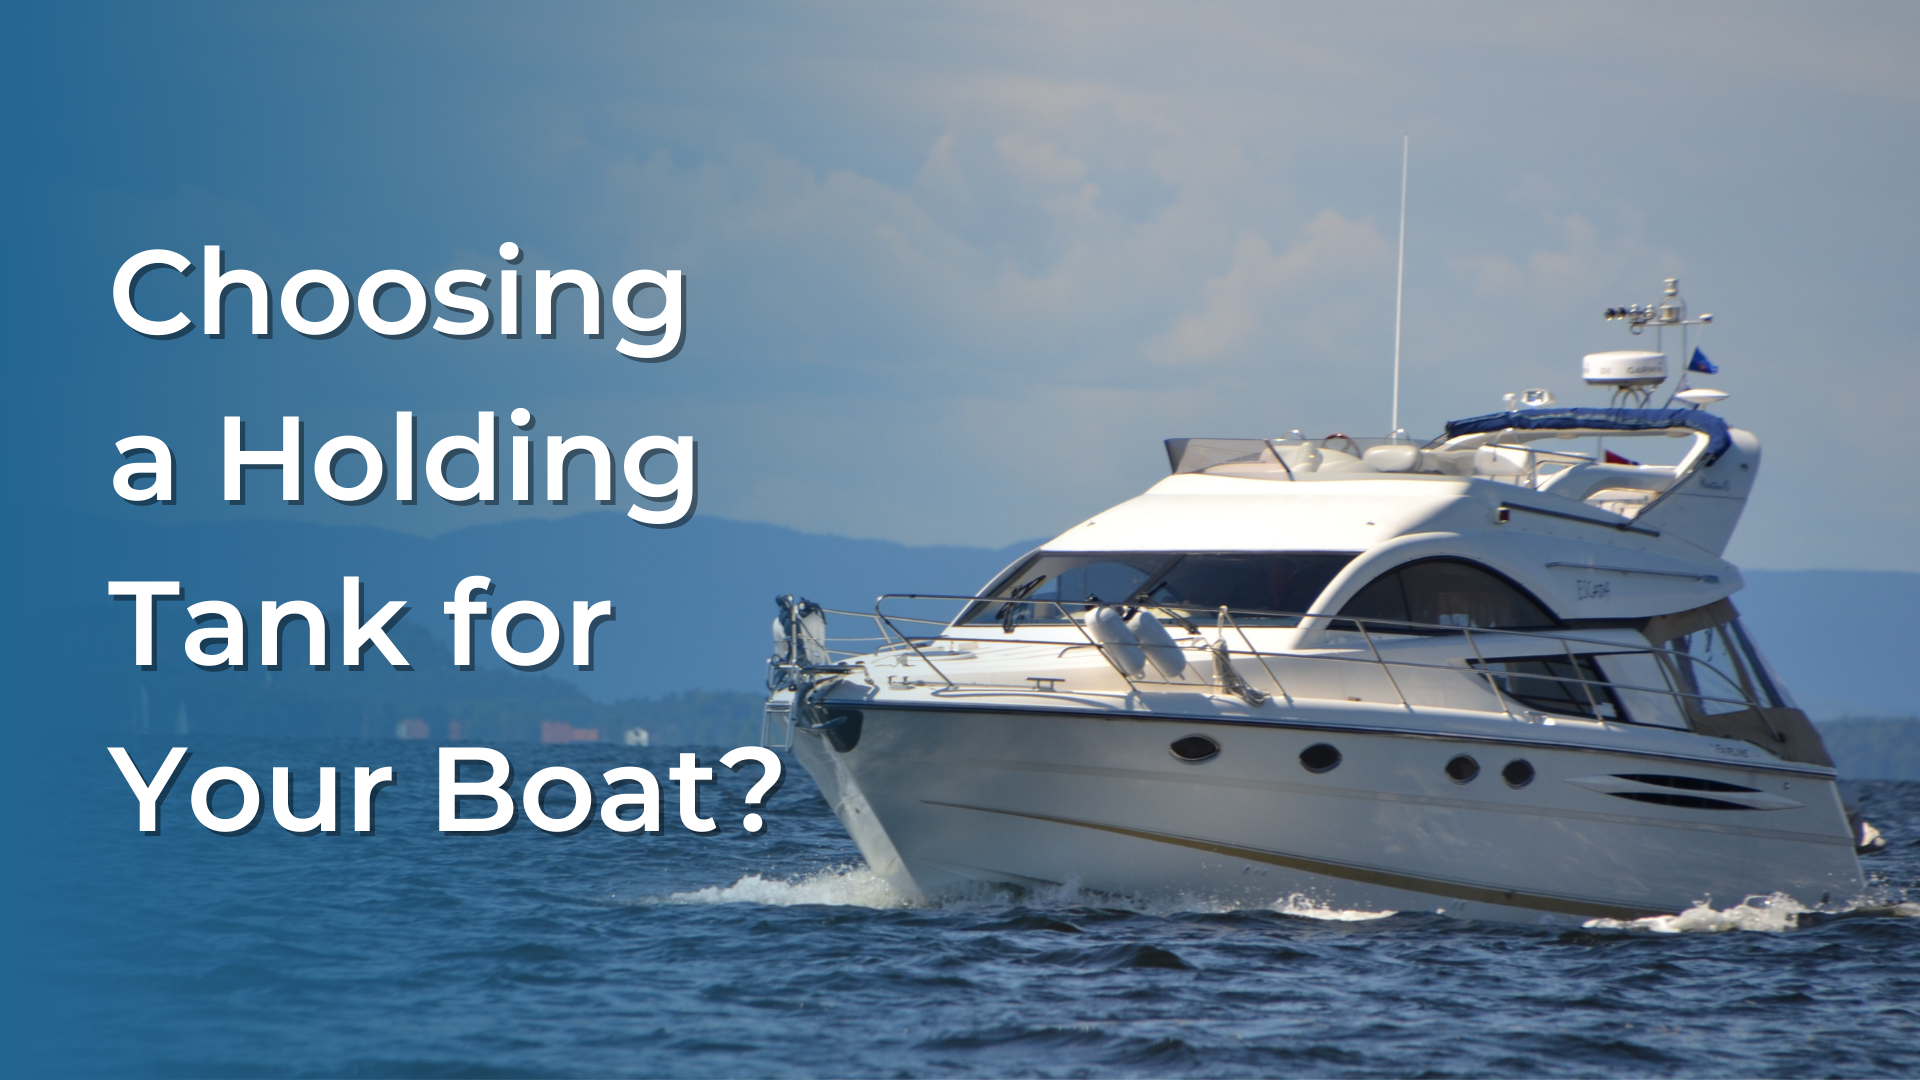 Things to Consider While Choosing a Holding Tank for Your Boat